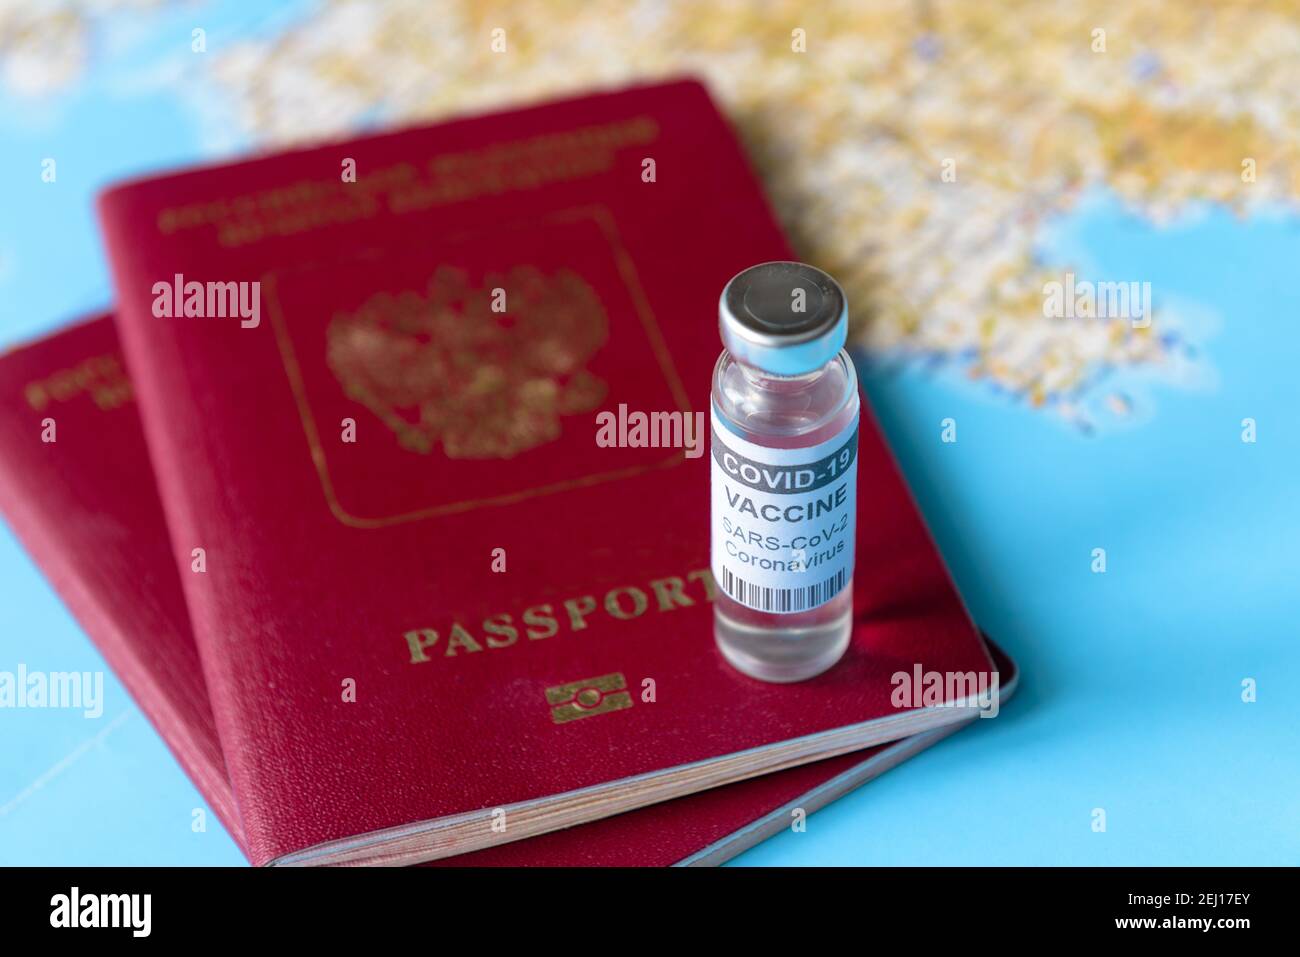 Coronavirus, travel and vaccine concept, bottle of COVID-19 vaccine and passports on tourist map. COVID vaccination due to restrictions and lockdown. Stock Photo